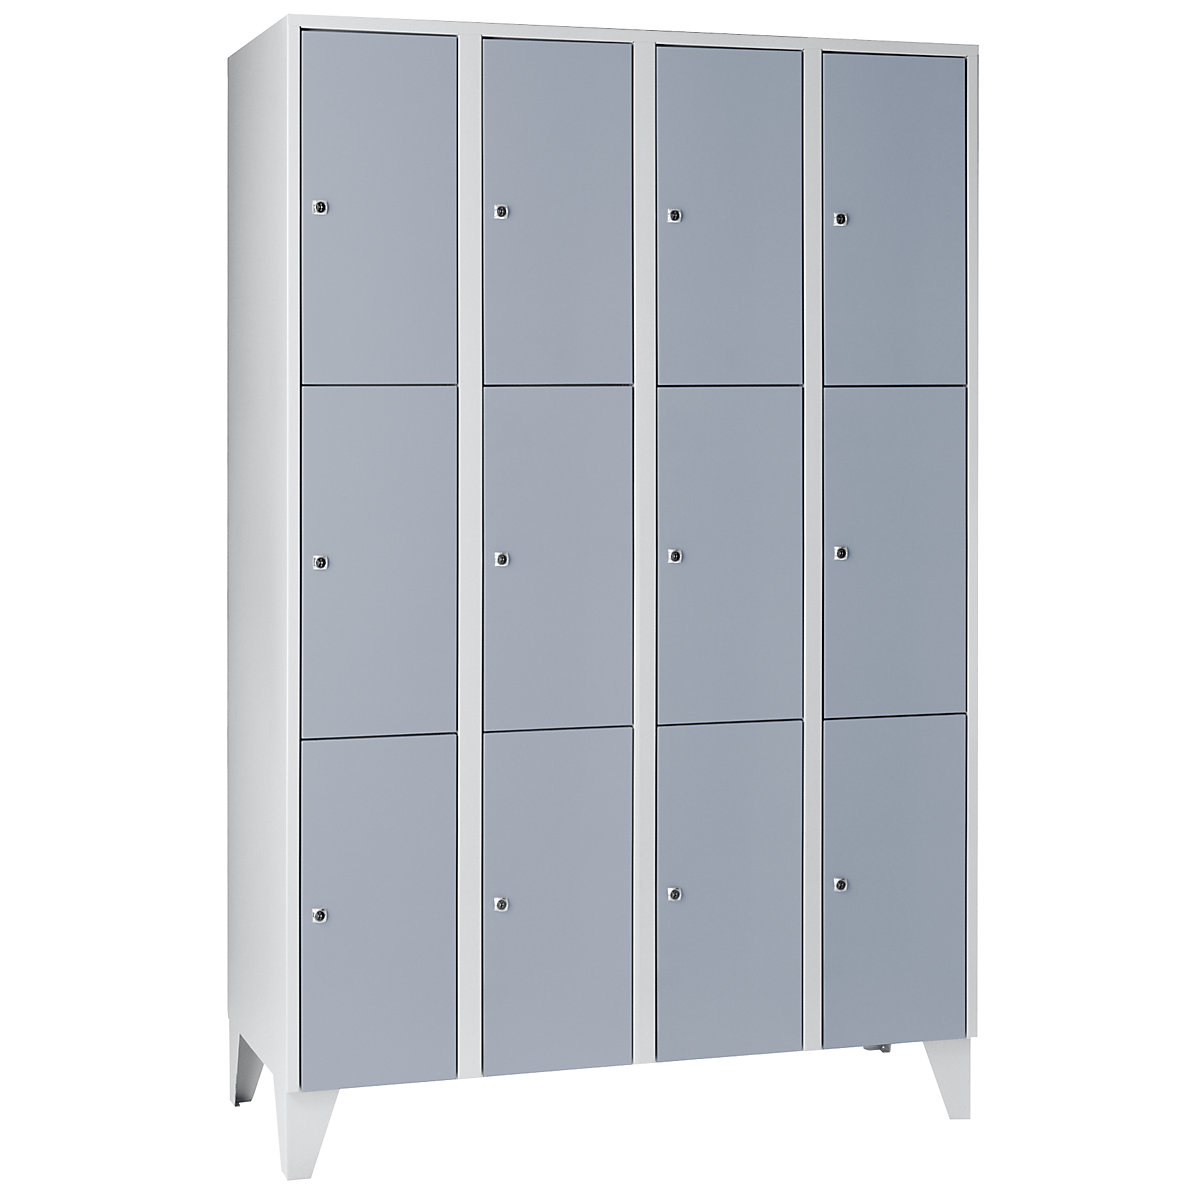 Clothes locker – Wolf, 4 compartments, 12 compartments, width 1200 mm, silver grey-6